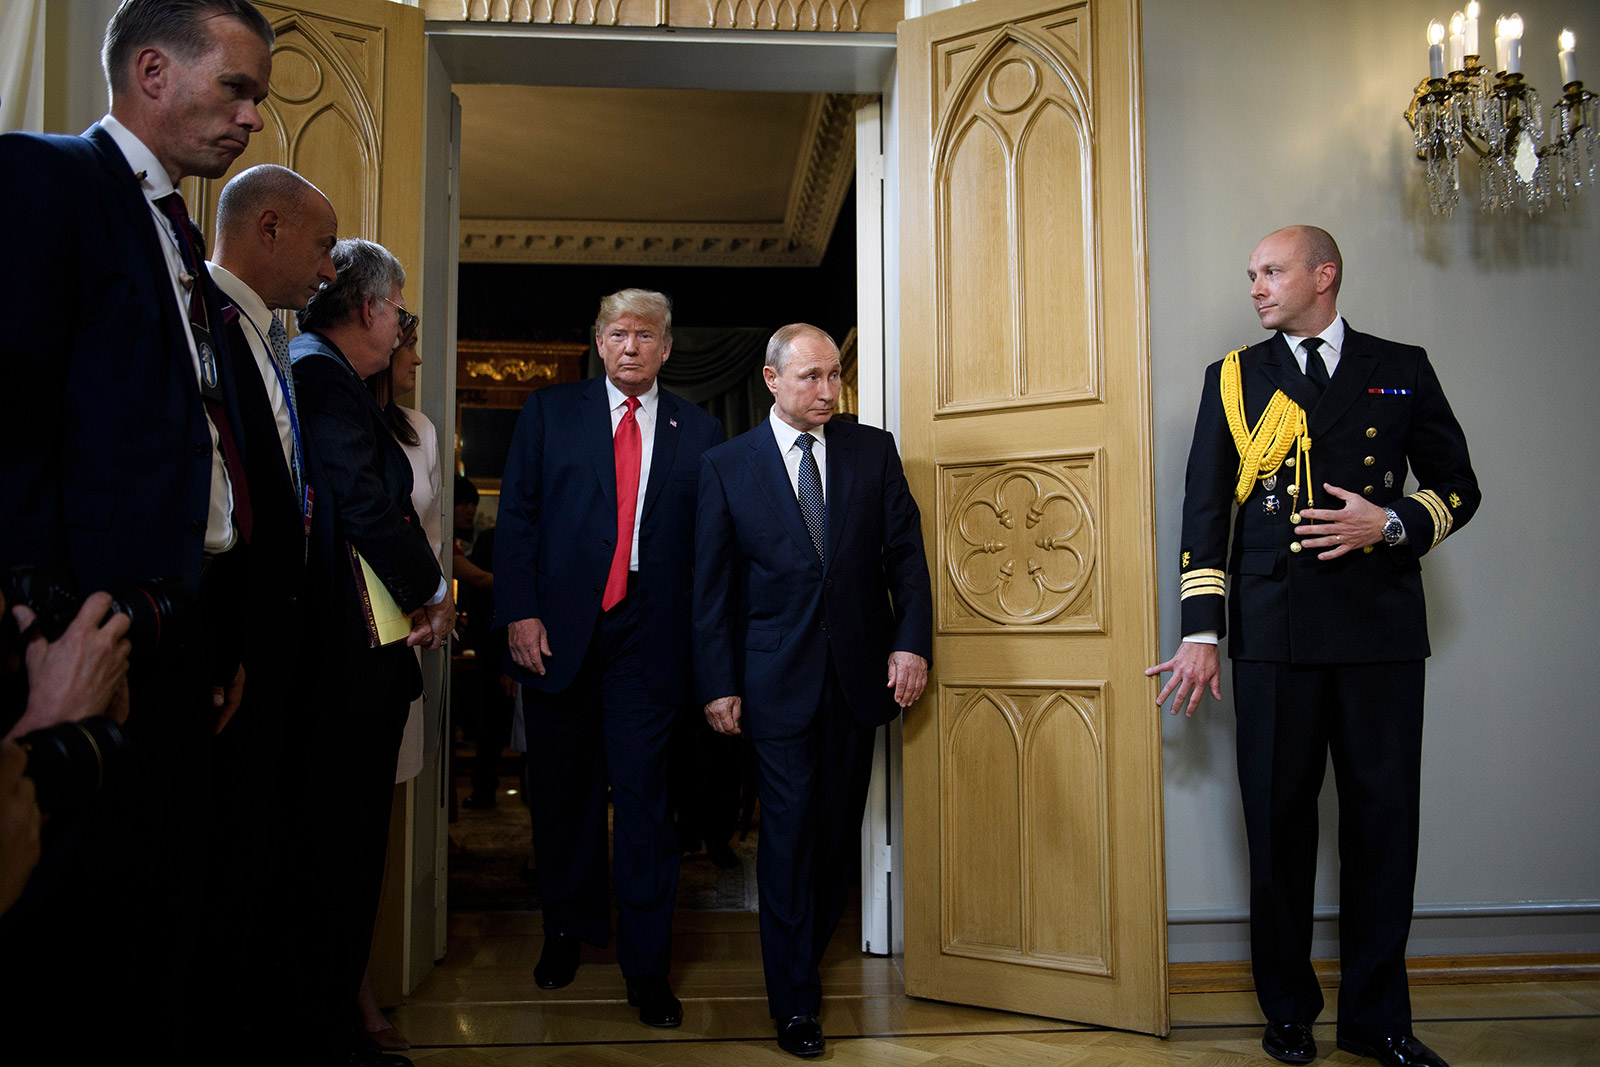 In Pictures Trump Meets With Putin